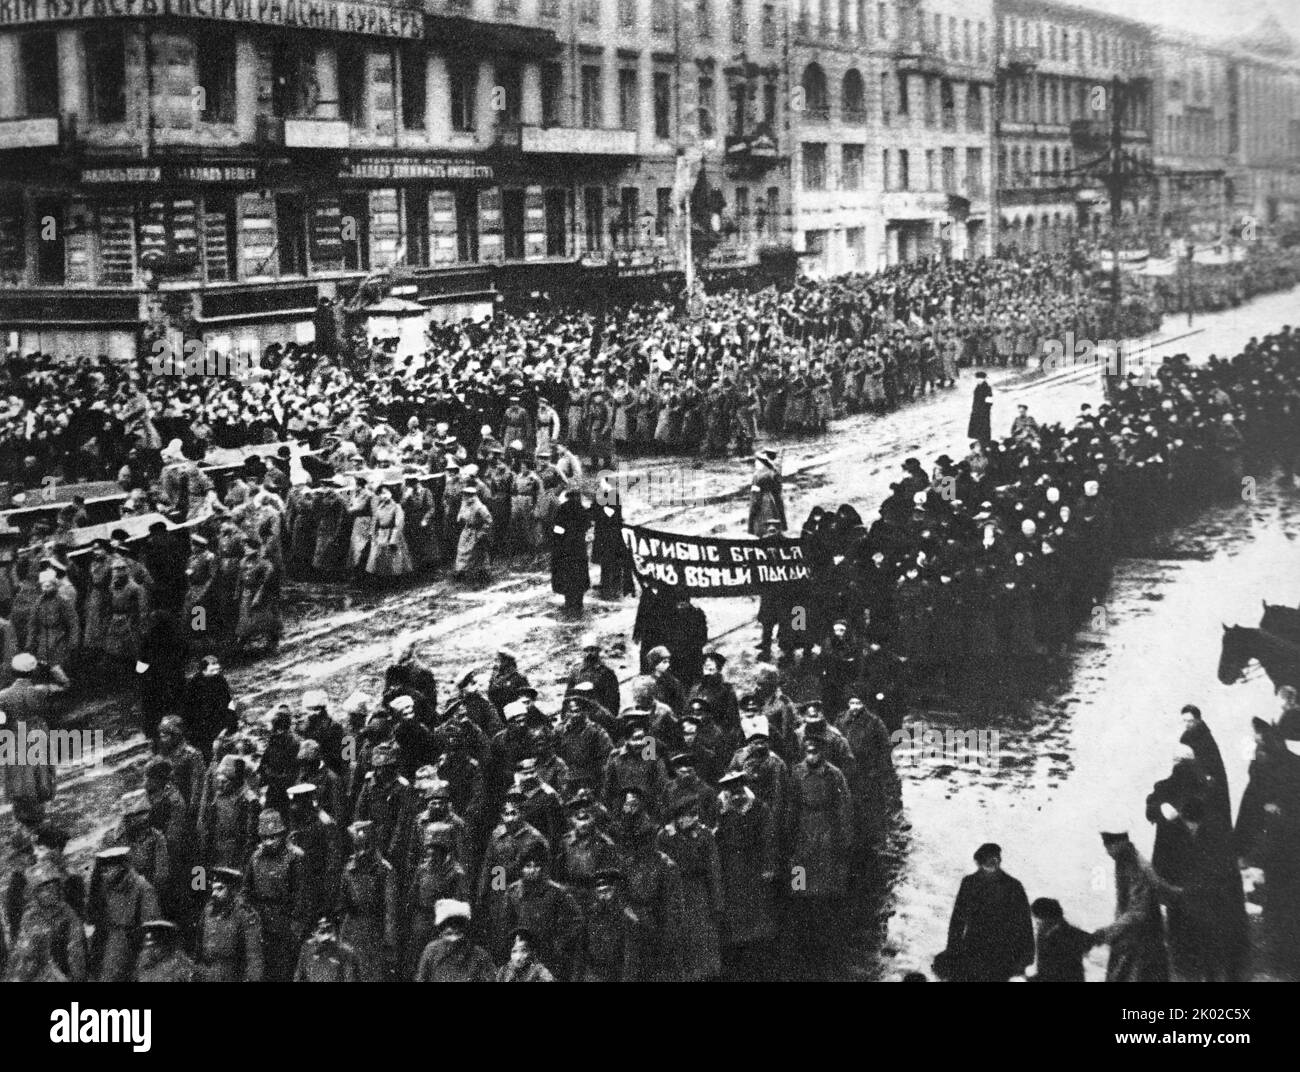 Funeral of the Victims of the February Revolution. Petrograd. Nevsky Prospect, March 1917. Photo by P. Otsup. Stock Photo